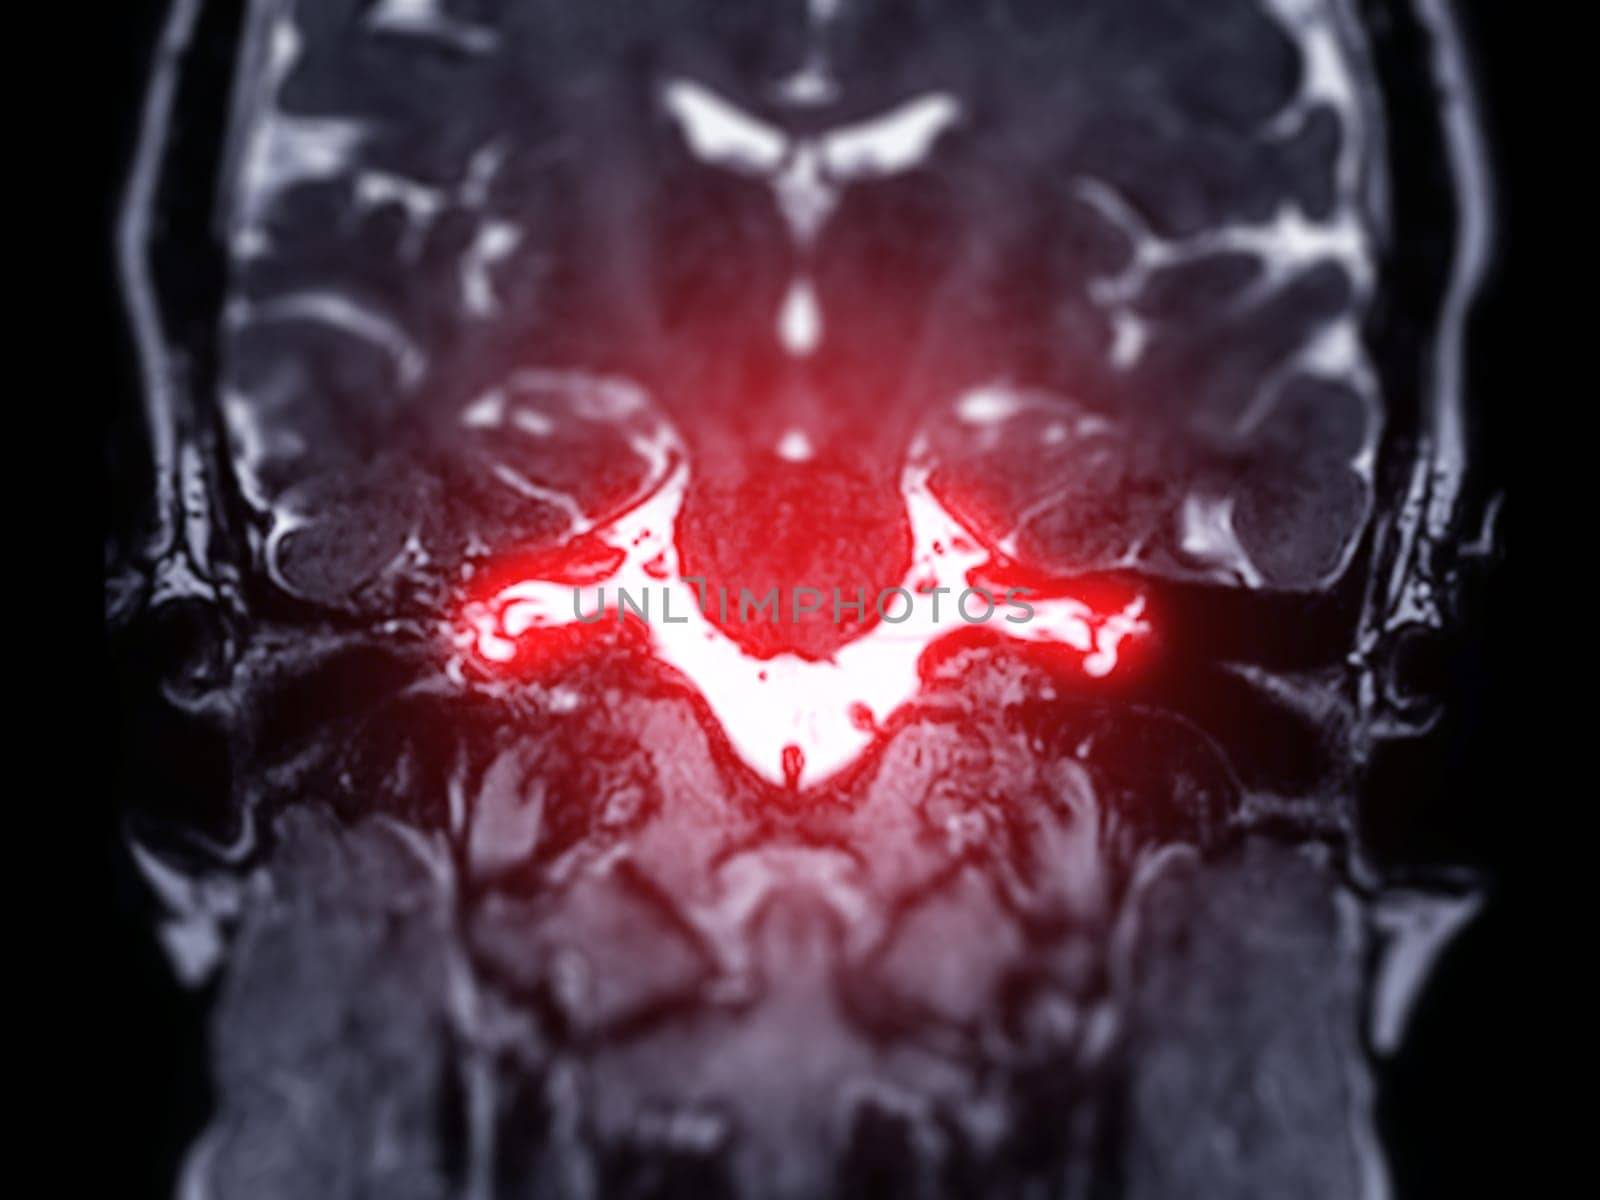 MRI Brain scan  with  the internal auditory canal (IAC) Coronal view.  by samunella